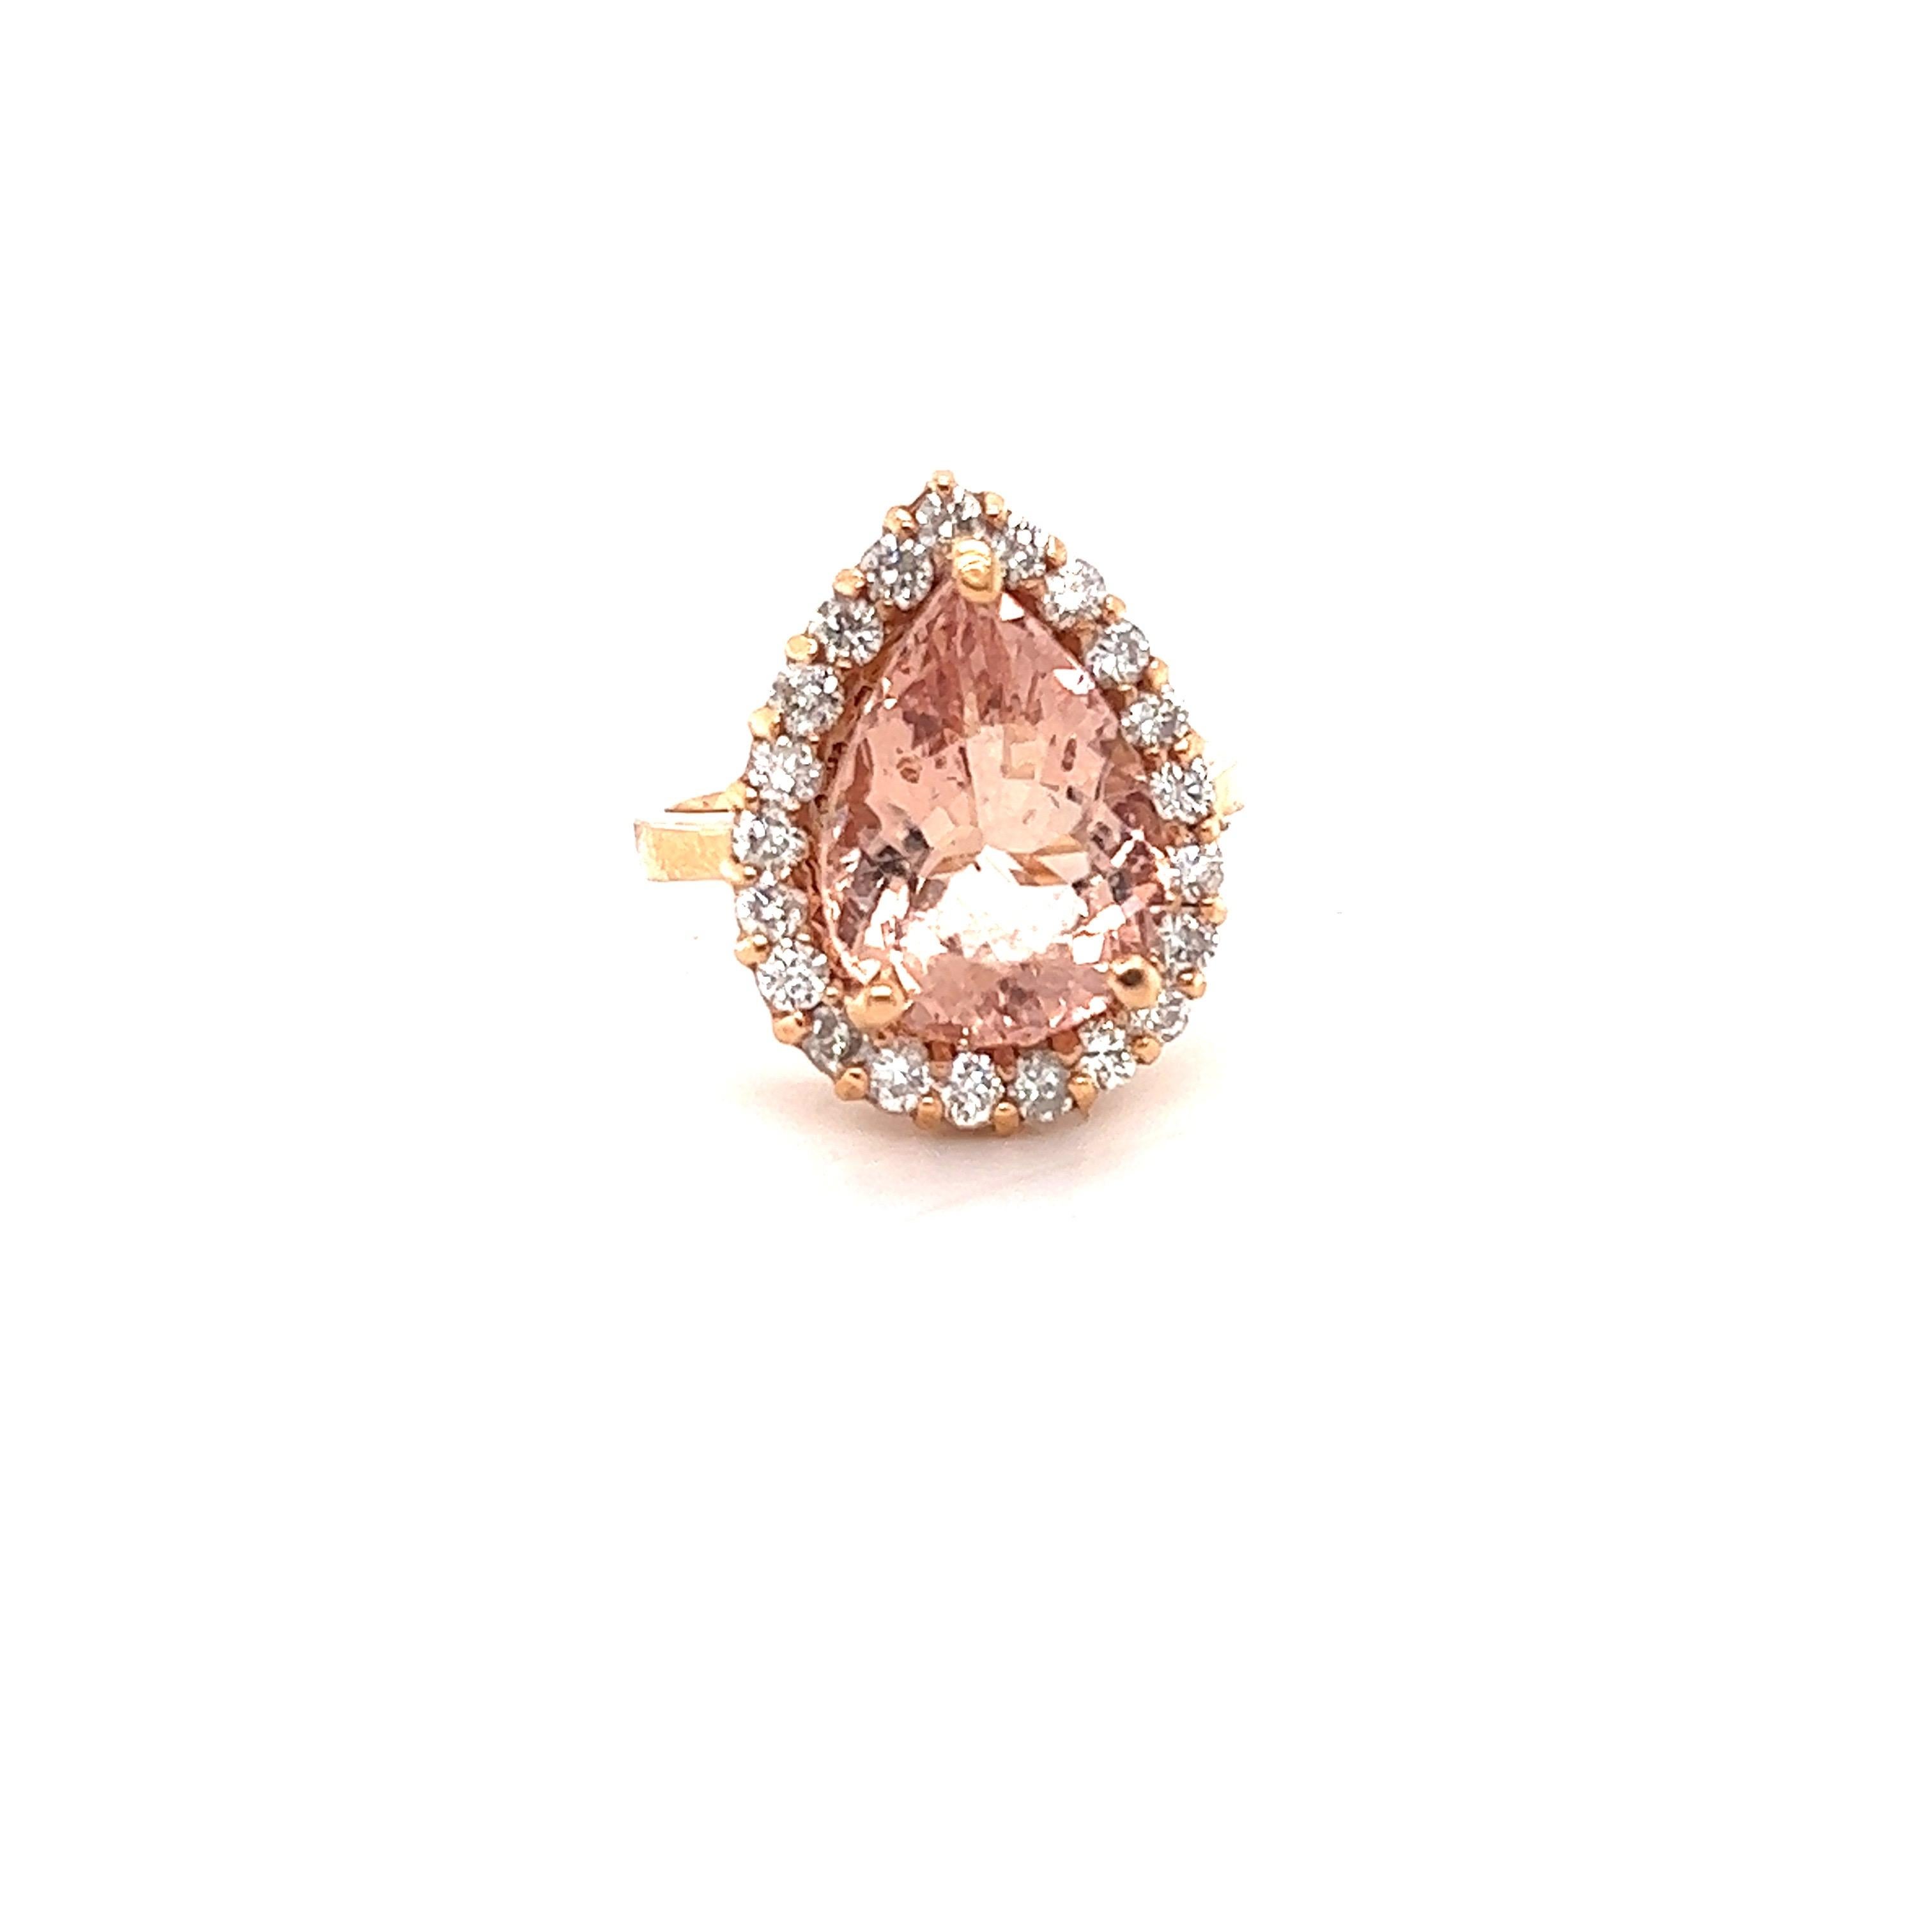 
This Morganite ring has a gorgeous 5.71 Carat Pear Cut Pink Morganite and is surrounded by a halo of 21 Round Cut Diamonds that weigh 0.97 Carats.  The diamonds have a clarity and color of SI-F. The total carat weight of the ring is 6.68 Carats.